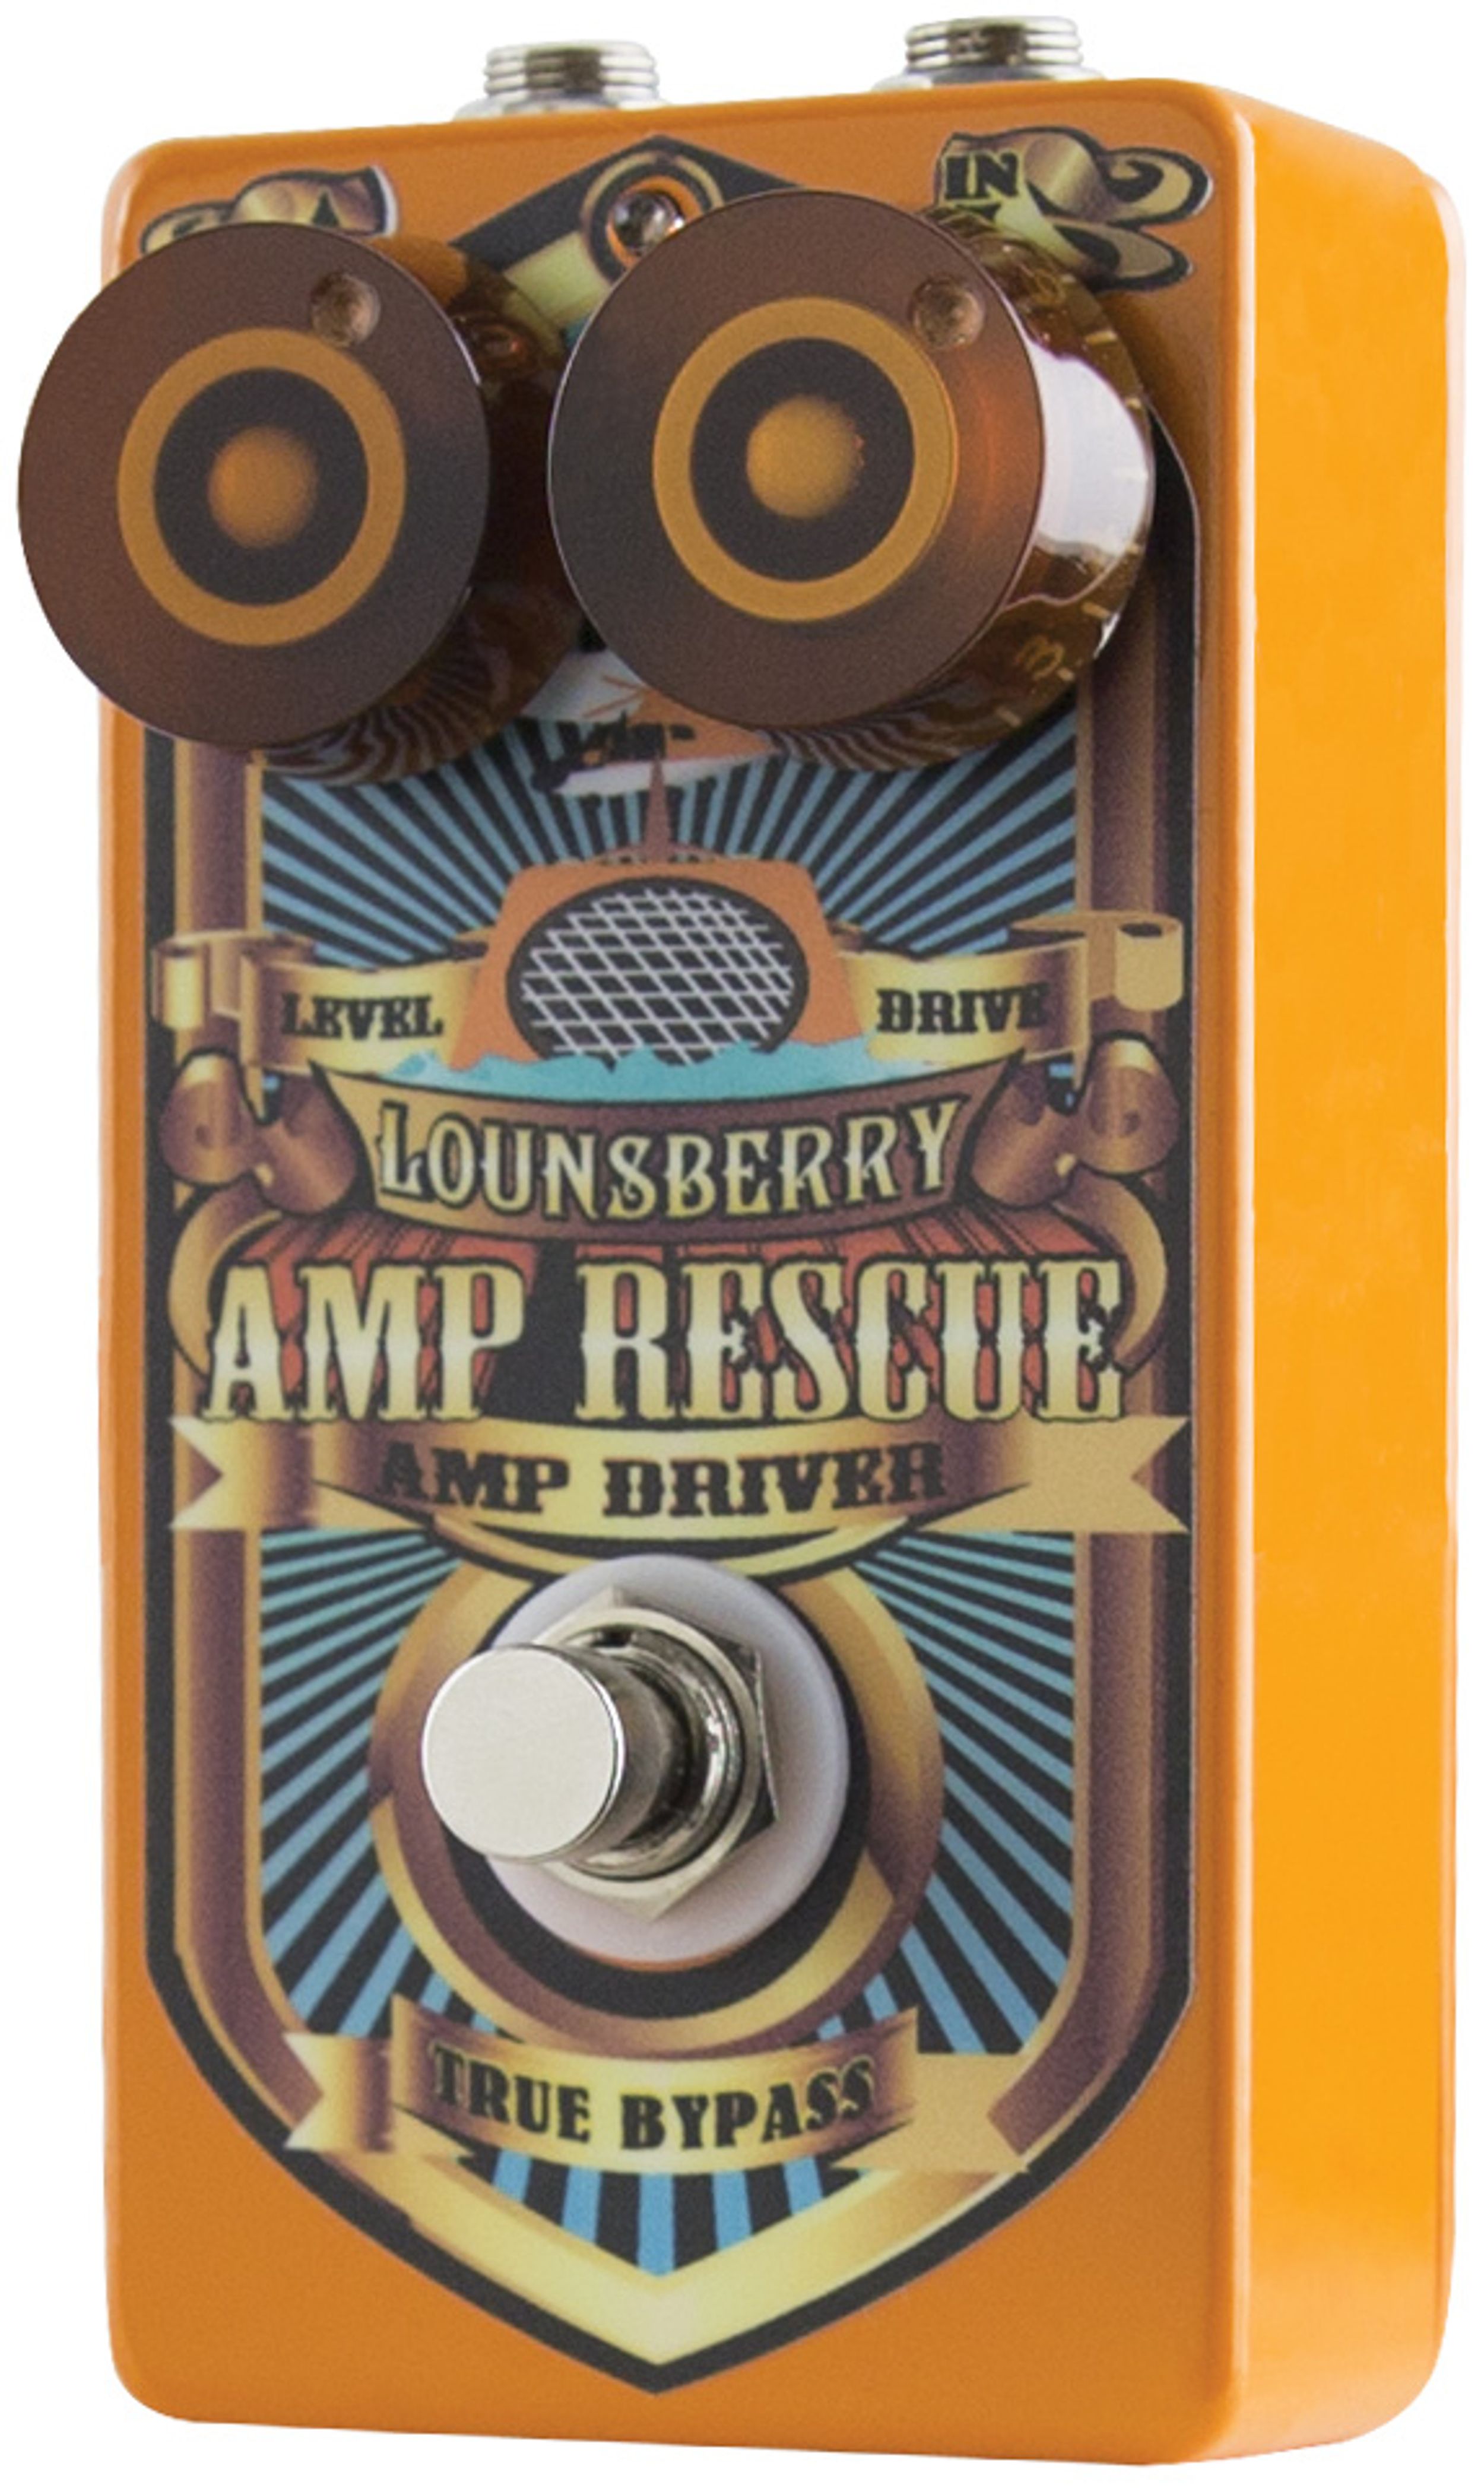 Quick Hit: Lounsberry Amp Rescue Review